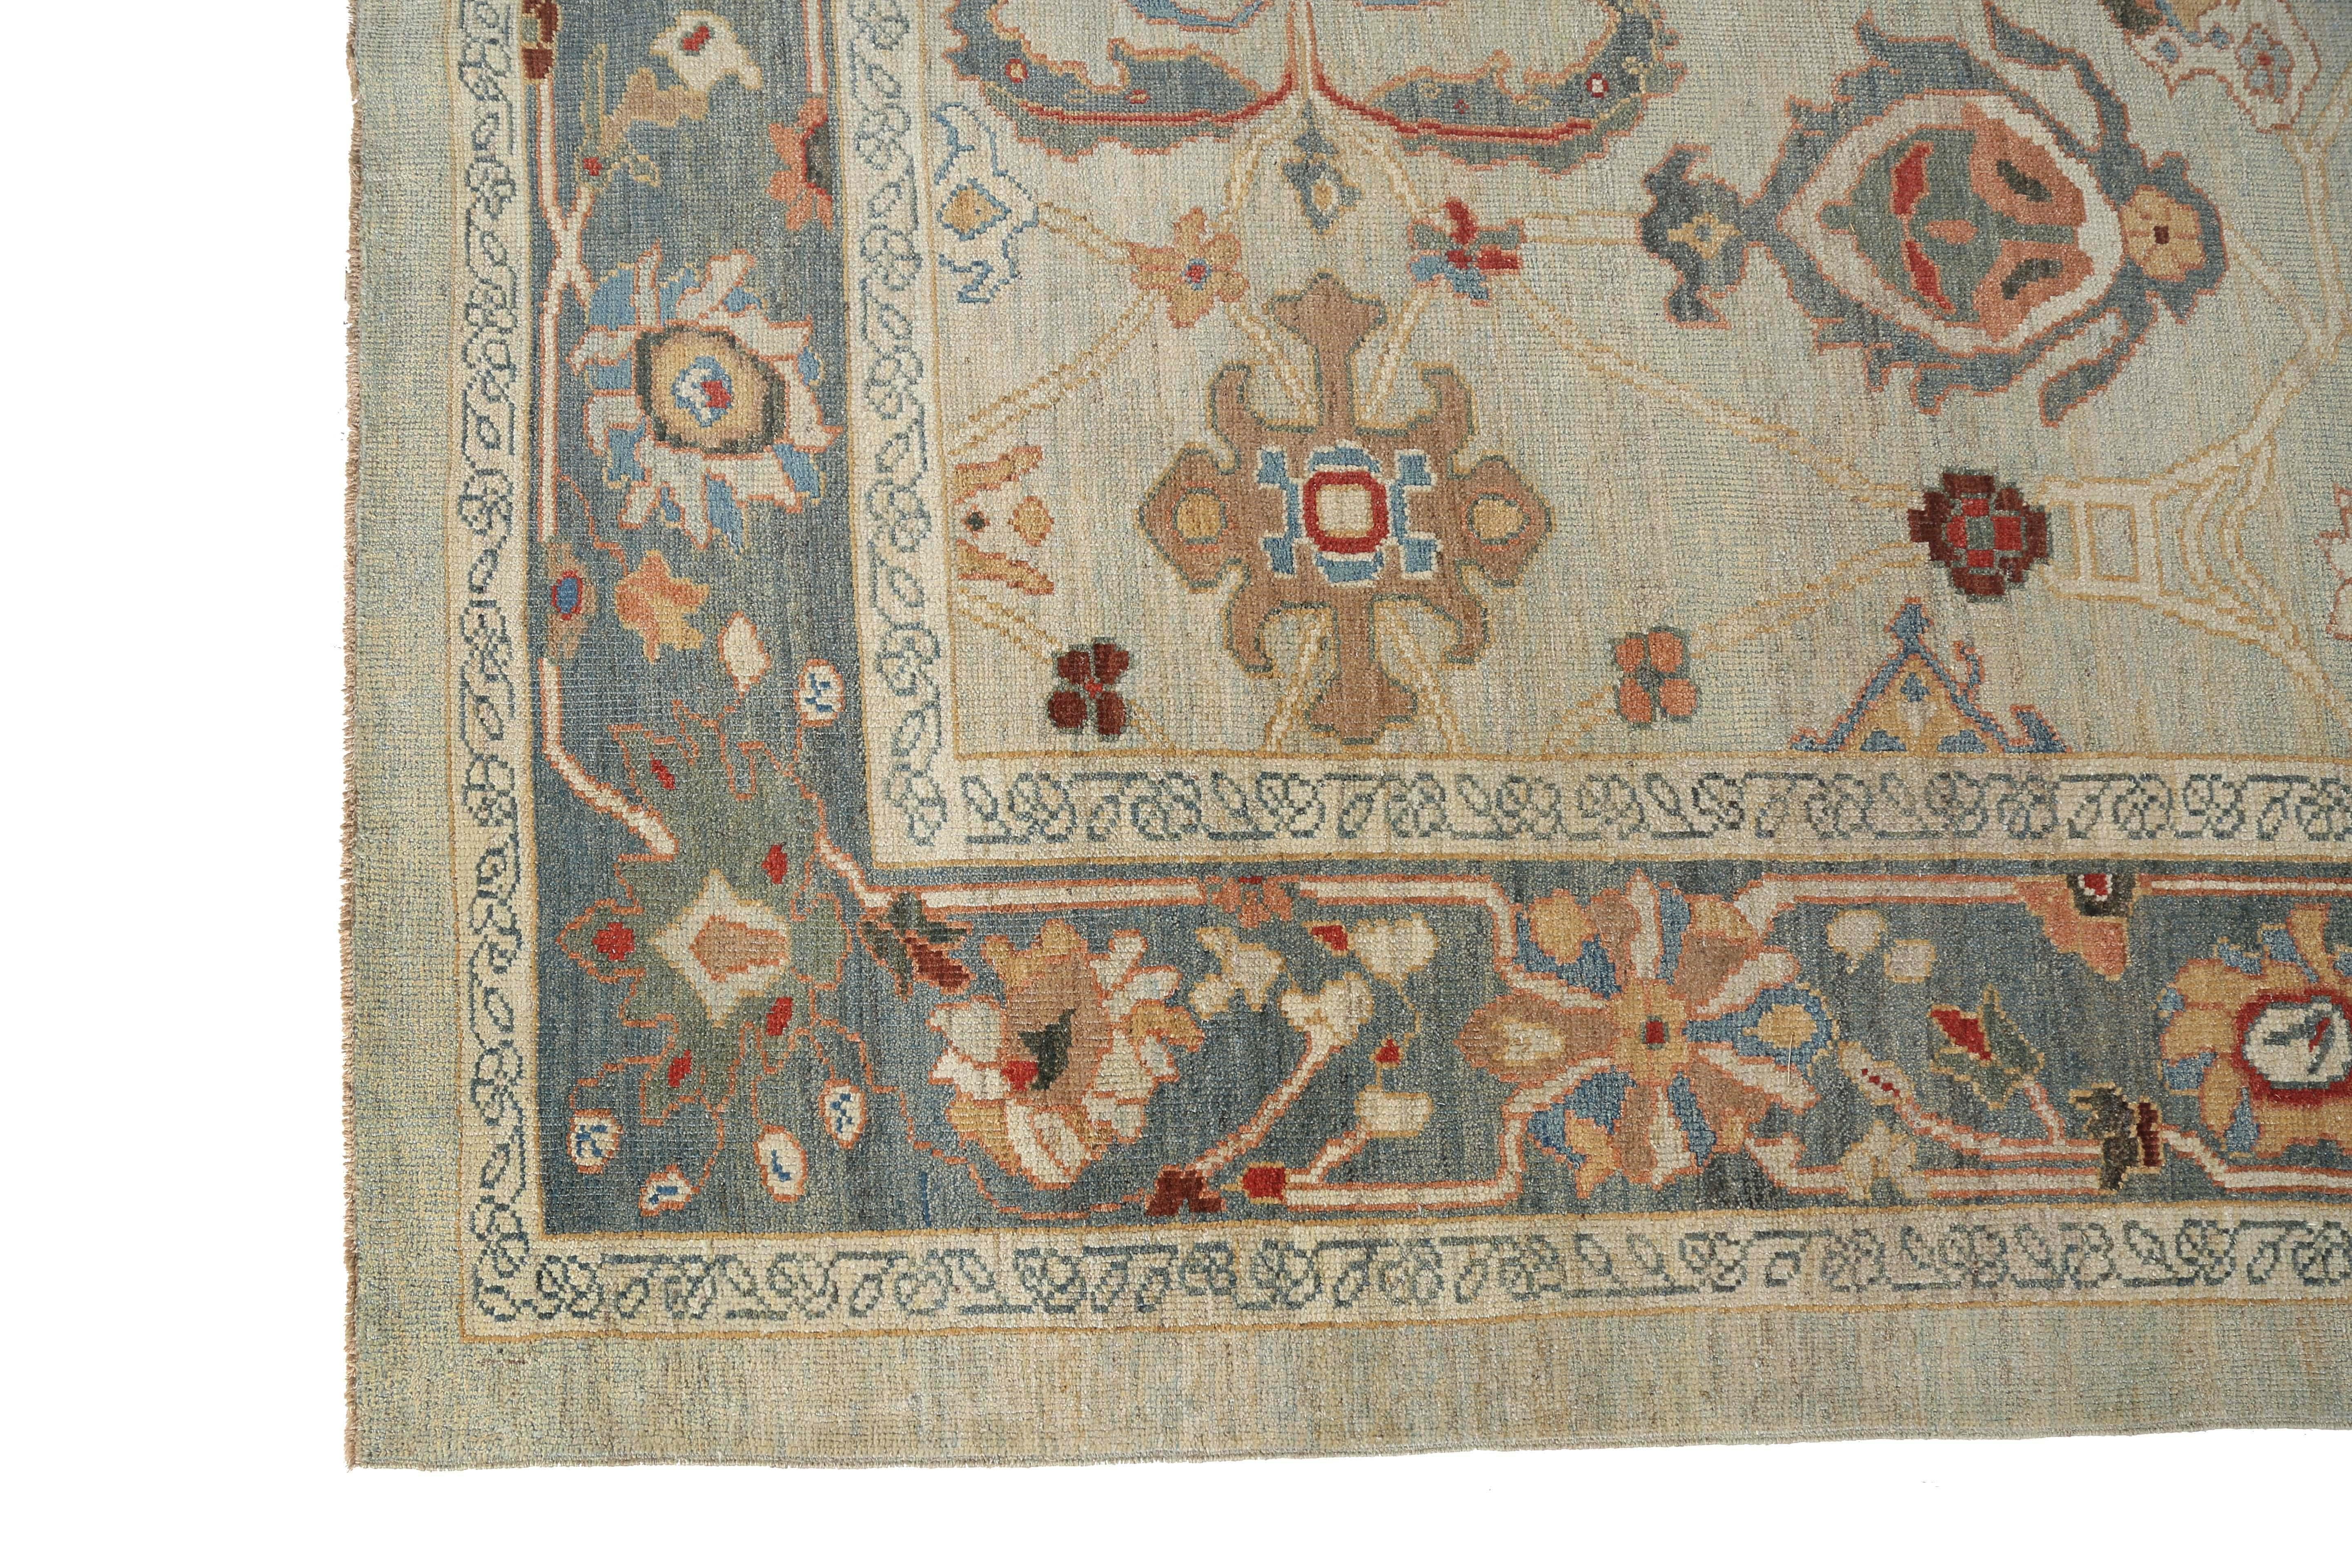 Introducing our beautiful handmade sultanabad rug in a Classic design! Measuring 8'2